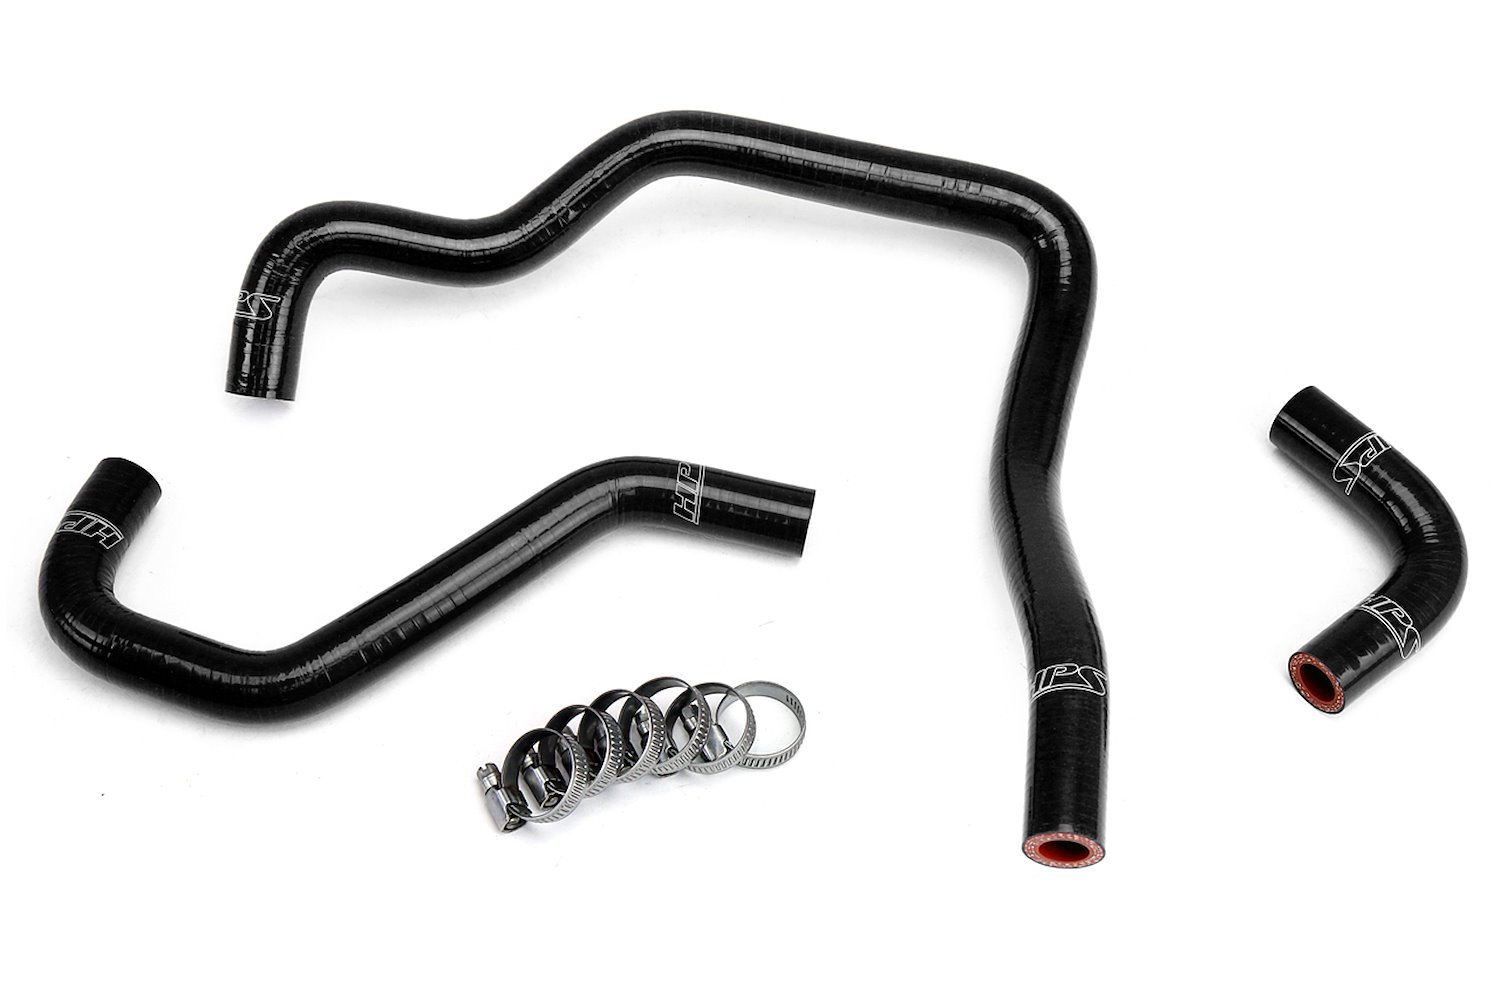 57-1430-BLK Heater Hose Kit, High-Temp 3-Ply Reinforced Silicone, Replace OEM Rubber Heater Coolant Hoses